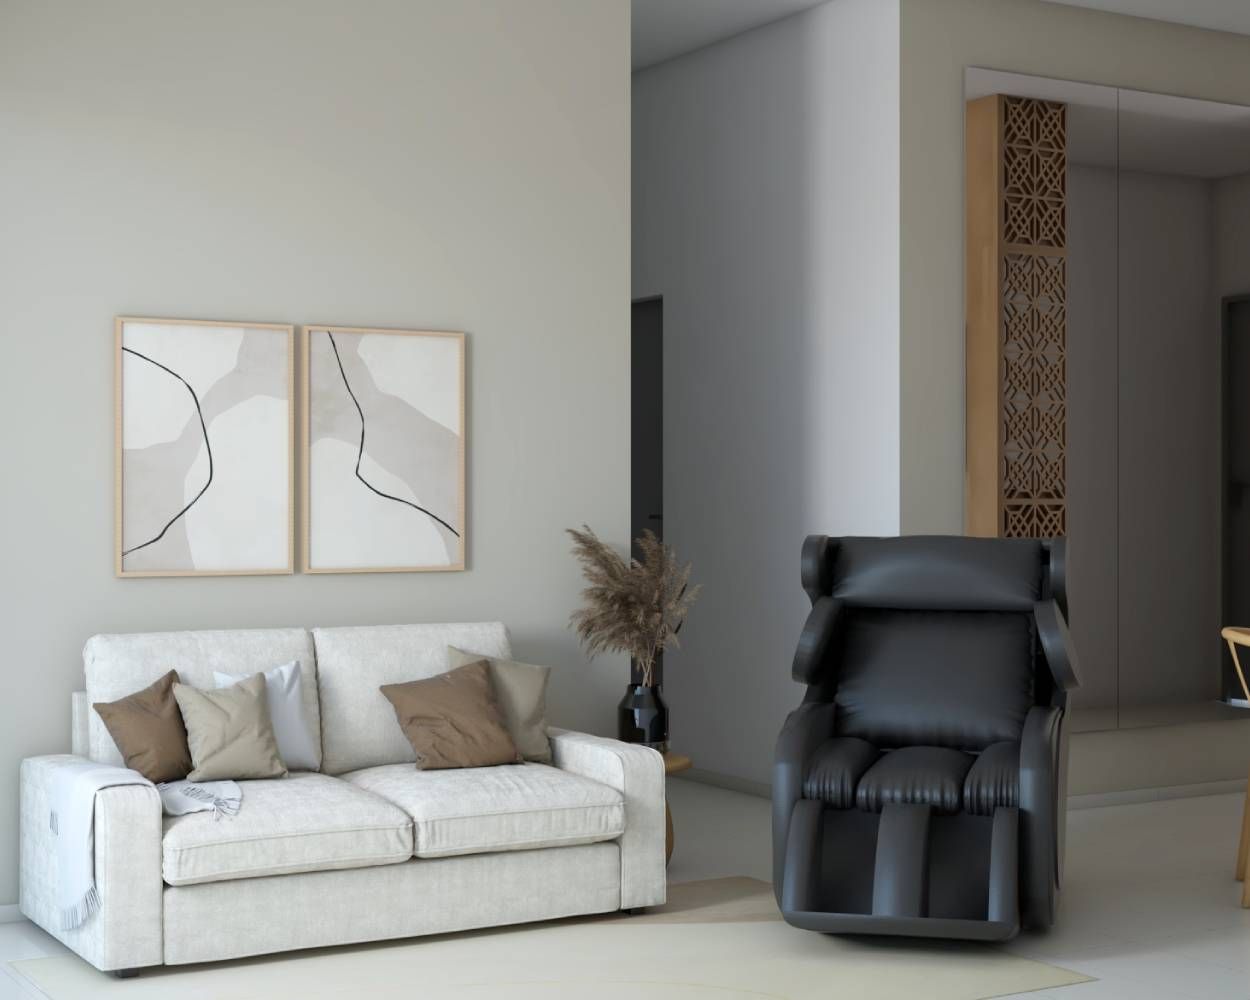 Modern Living Room Design With White 2-Seater Sofa And Black Recliner Chair